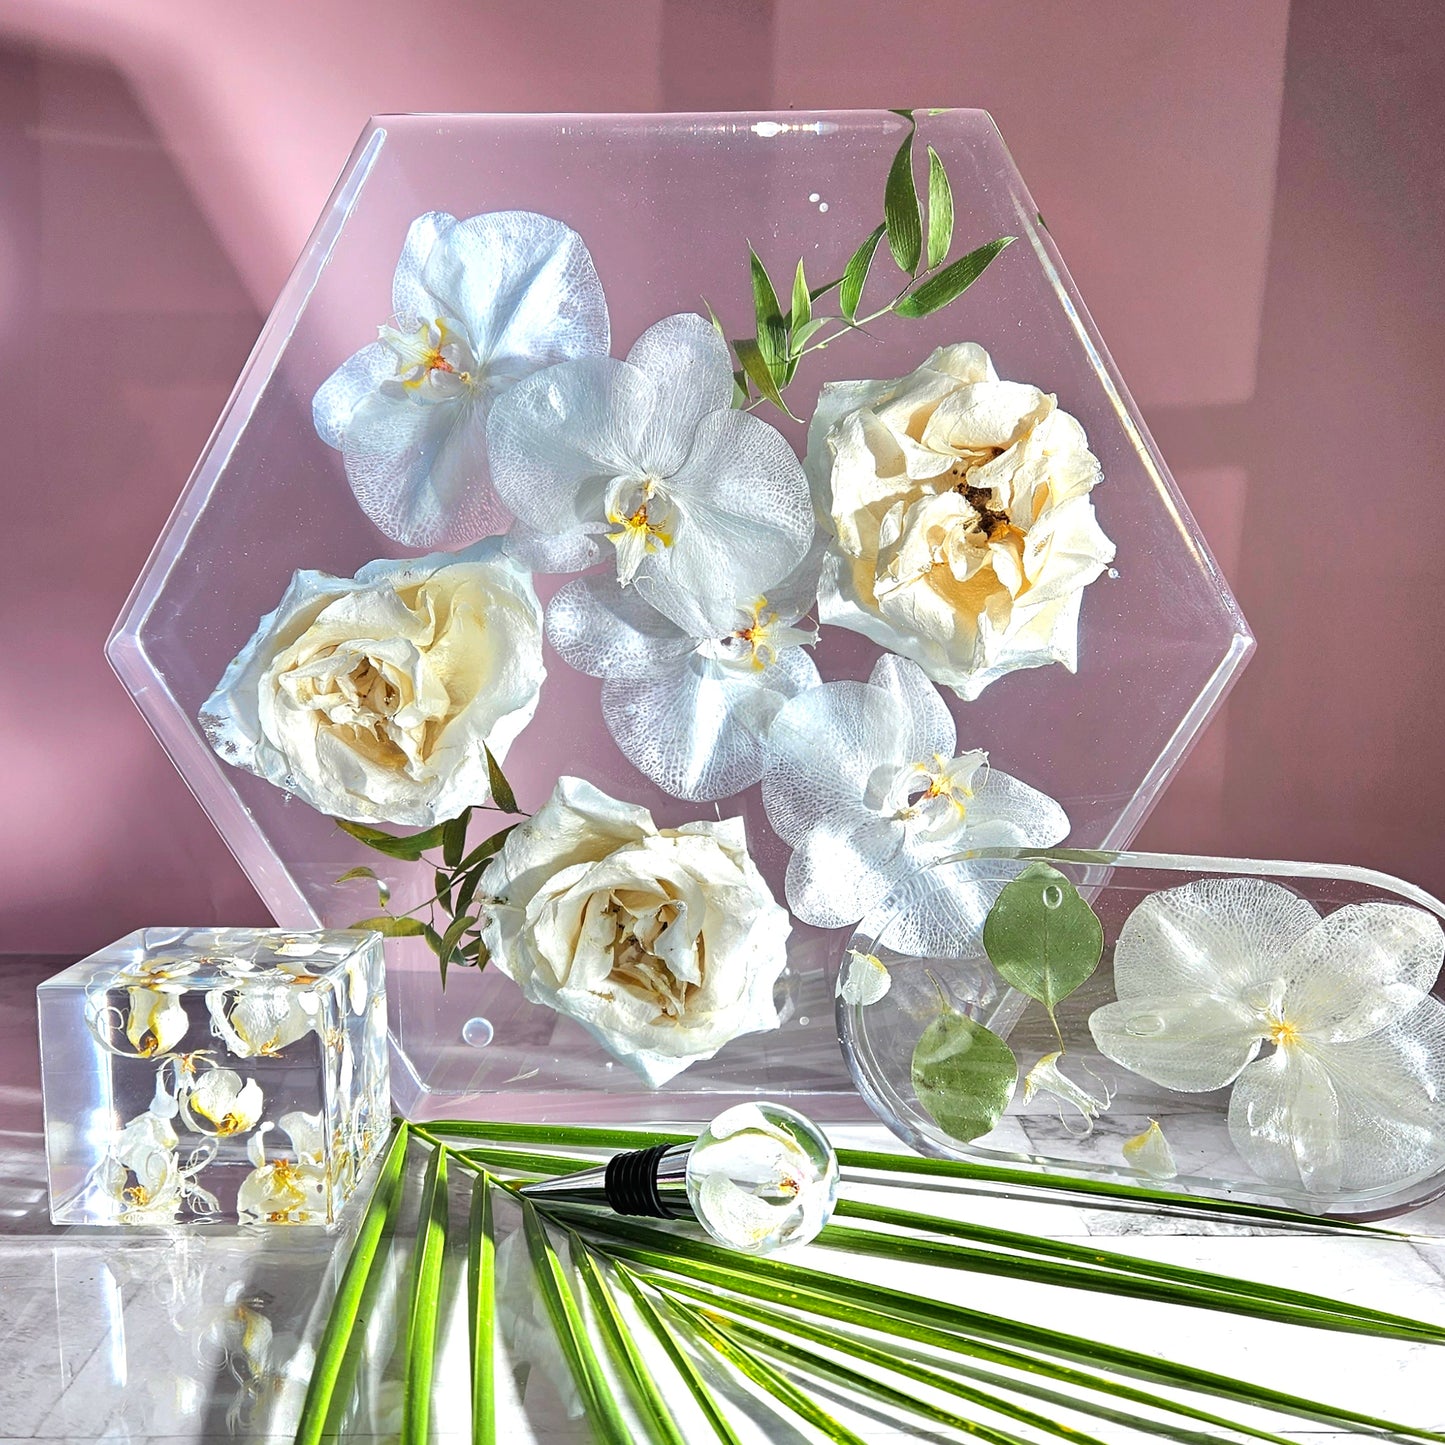 Large Orchid 12" Hexagon 3D Resin Wedding Bouquet Preservation Floral Gift Keepsake Save Your Wedding Flowers Forever